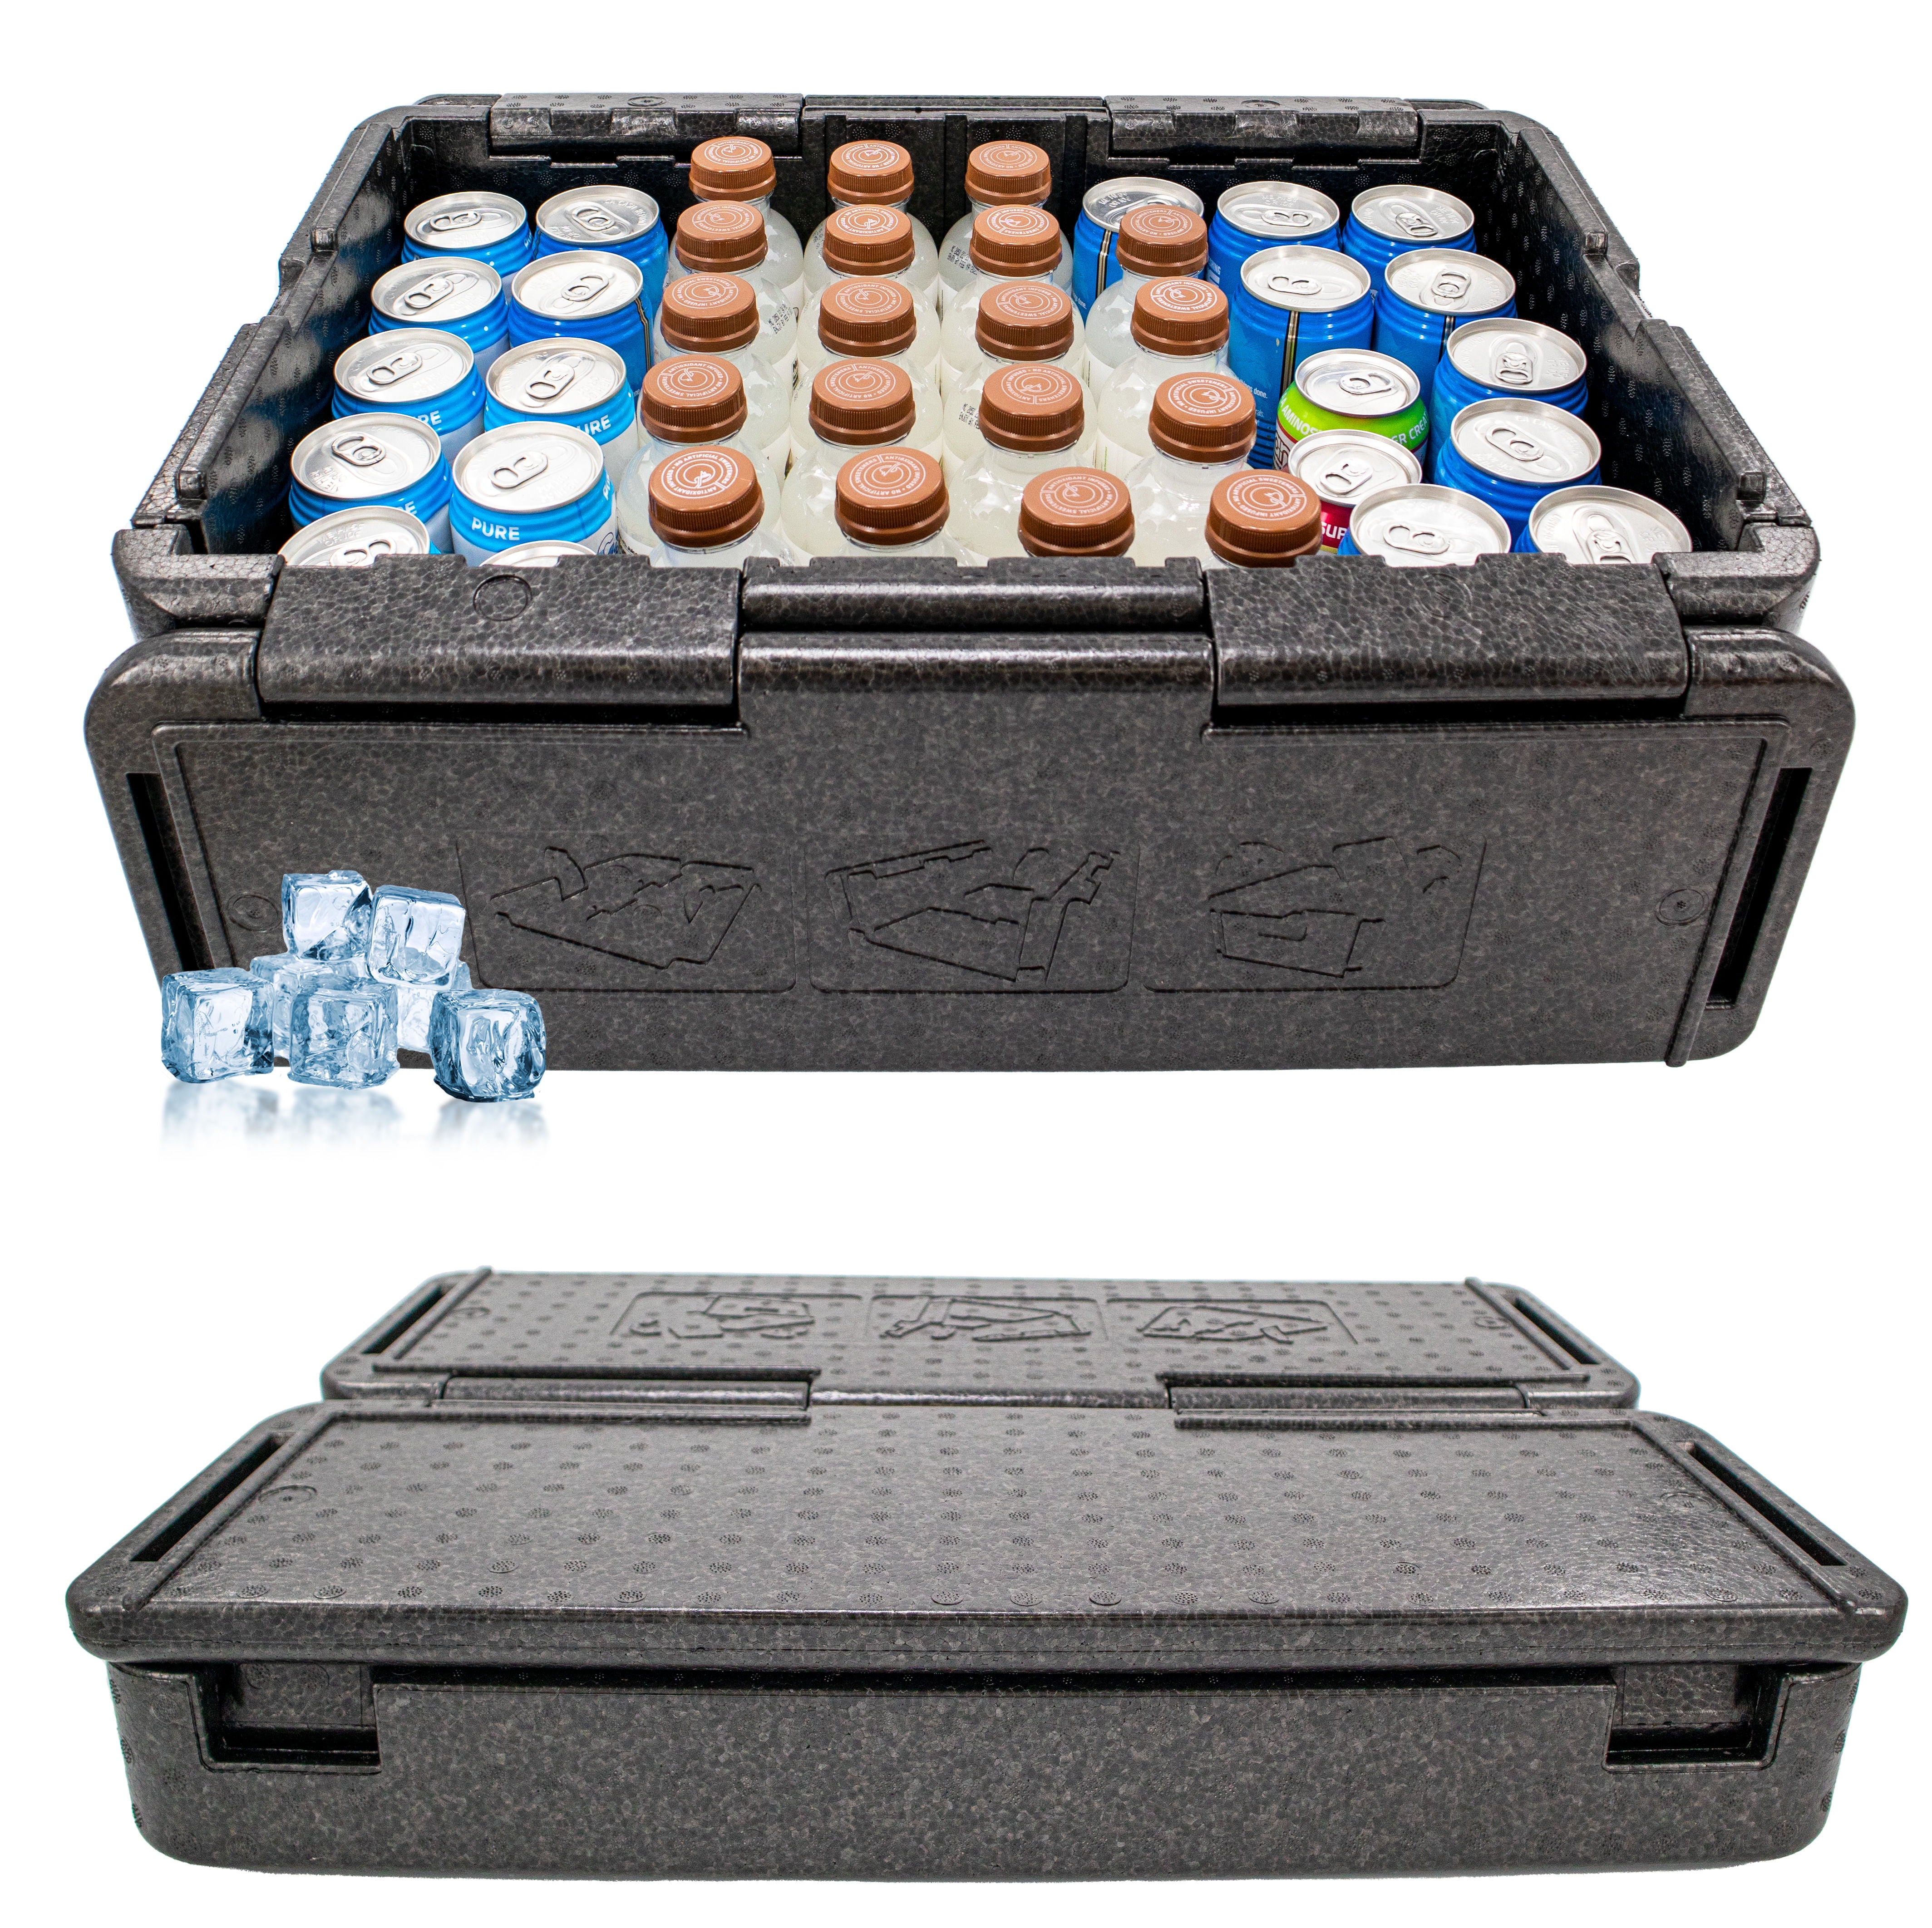 Details about   COLLAPSIBLE ICELESS COOLER LIGHTWEIGHT PORTABLE ICE FREE ESKY XL CHILL CHEST 